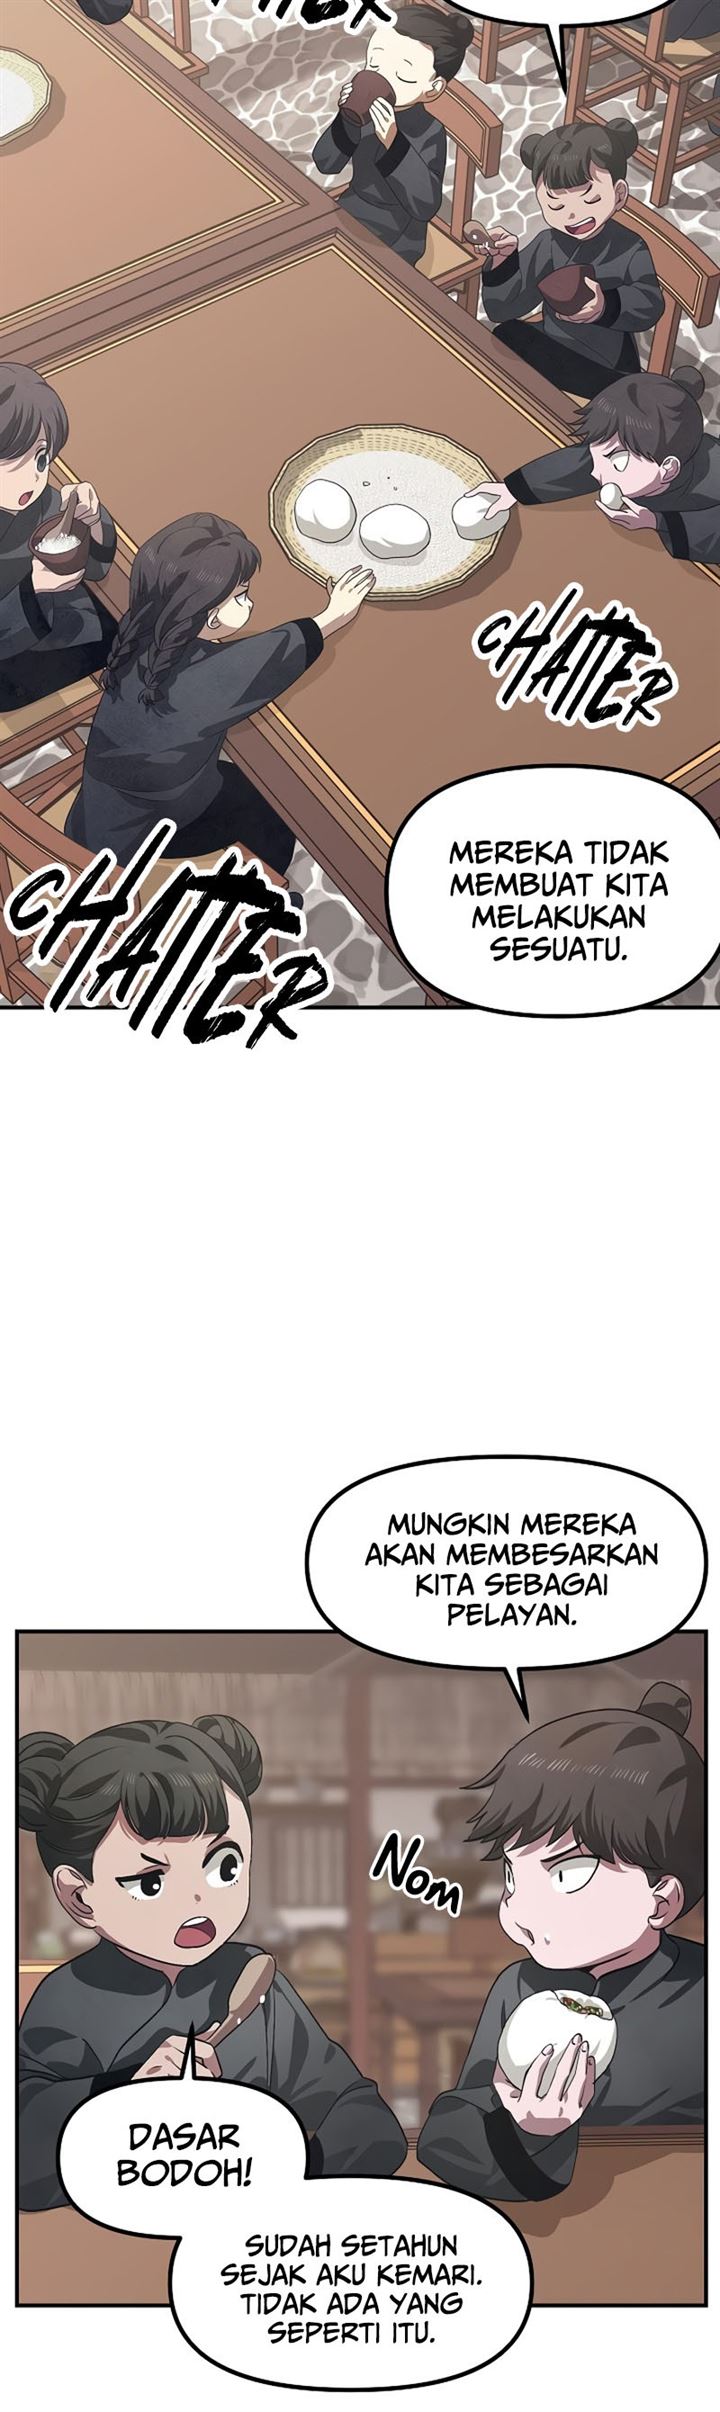 SSS-Class Suicide Hunter Chapter 63